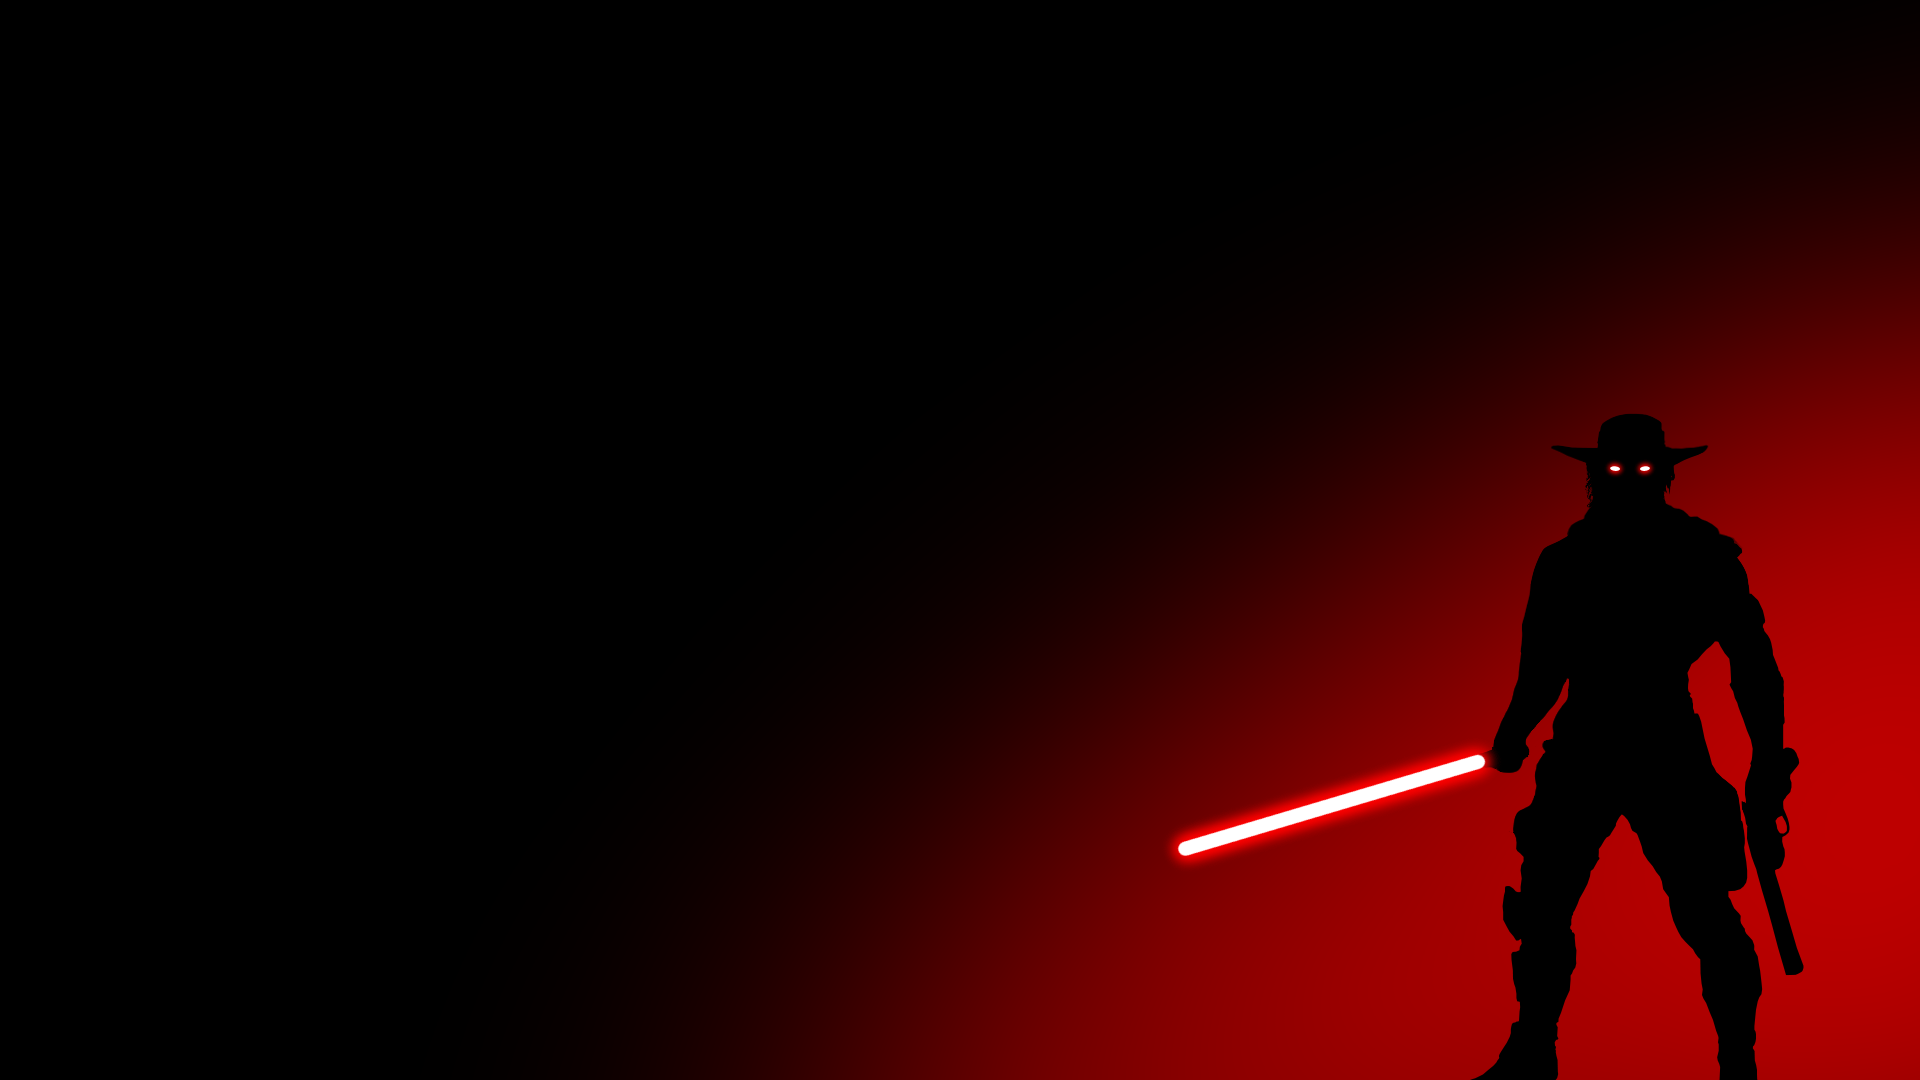 Star Wars - Sith Outlaw Wallpaper